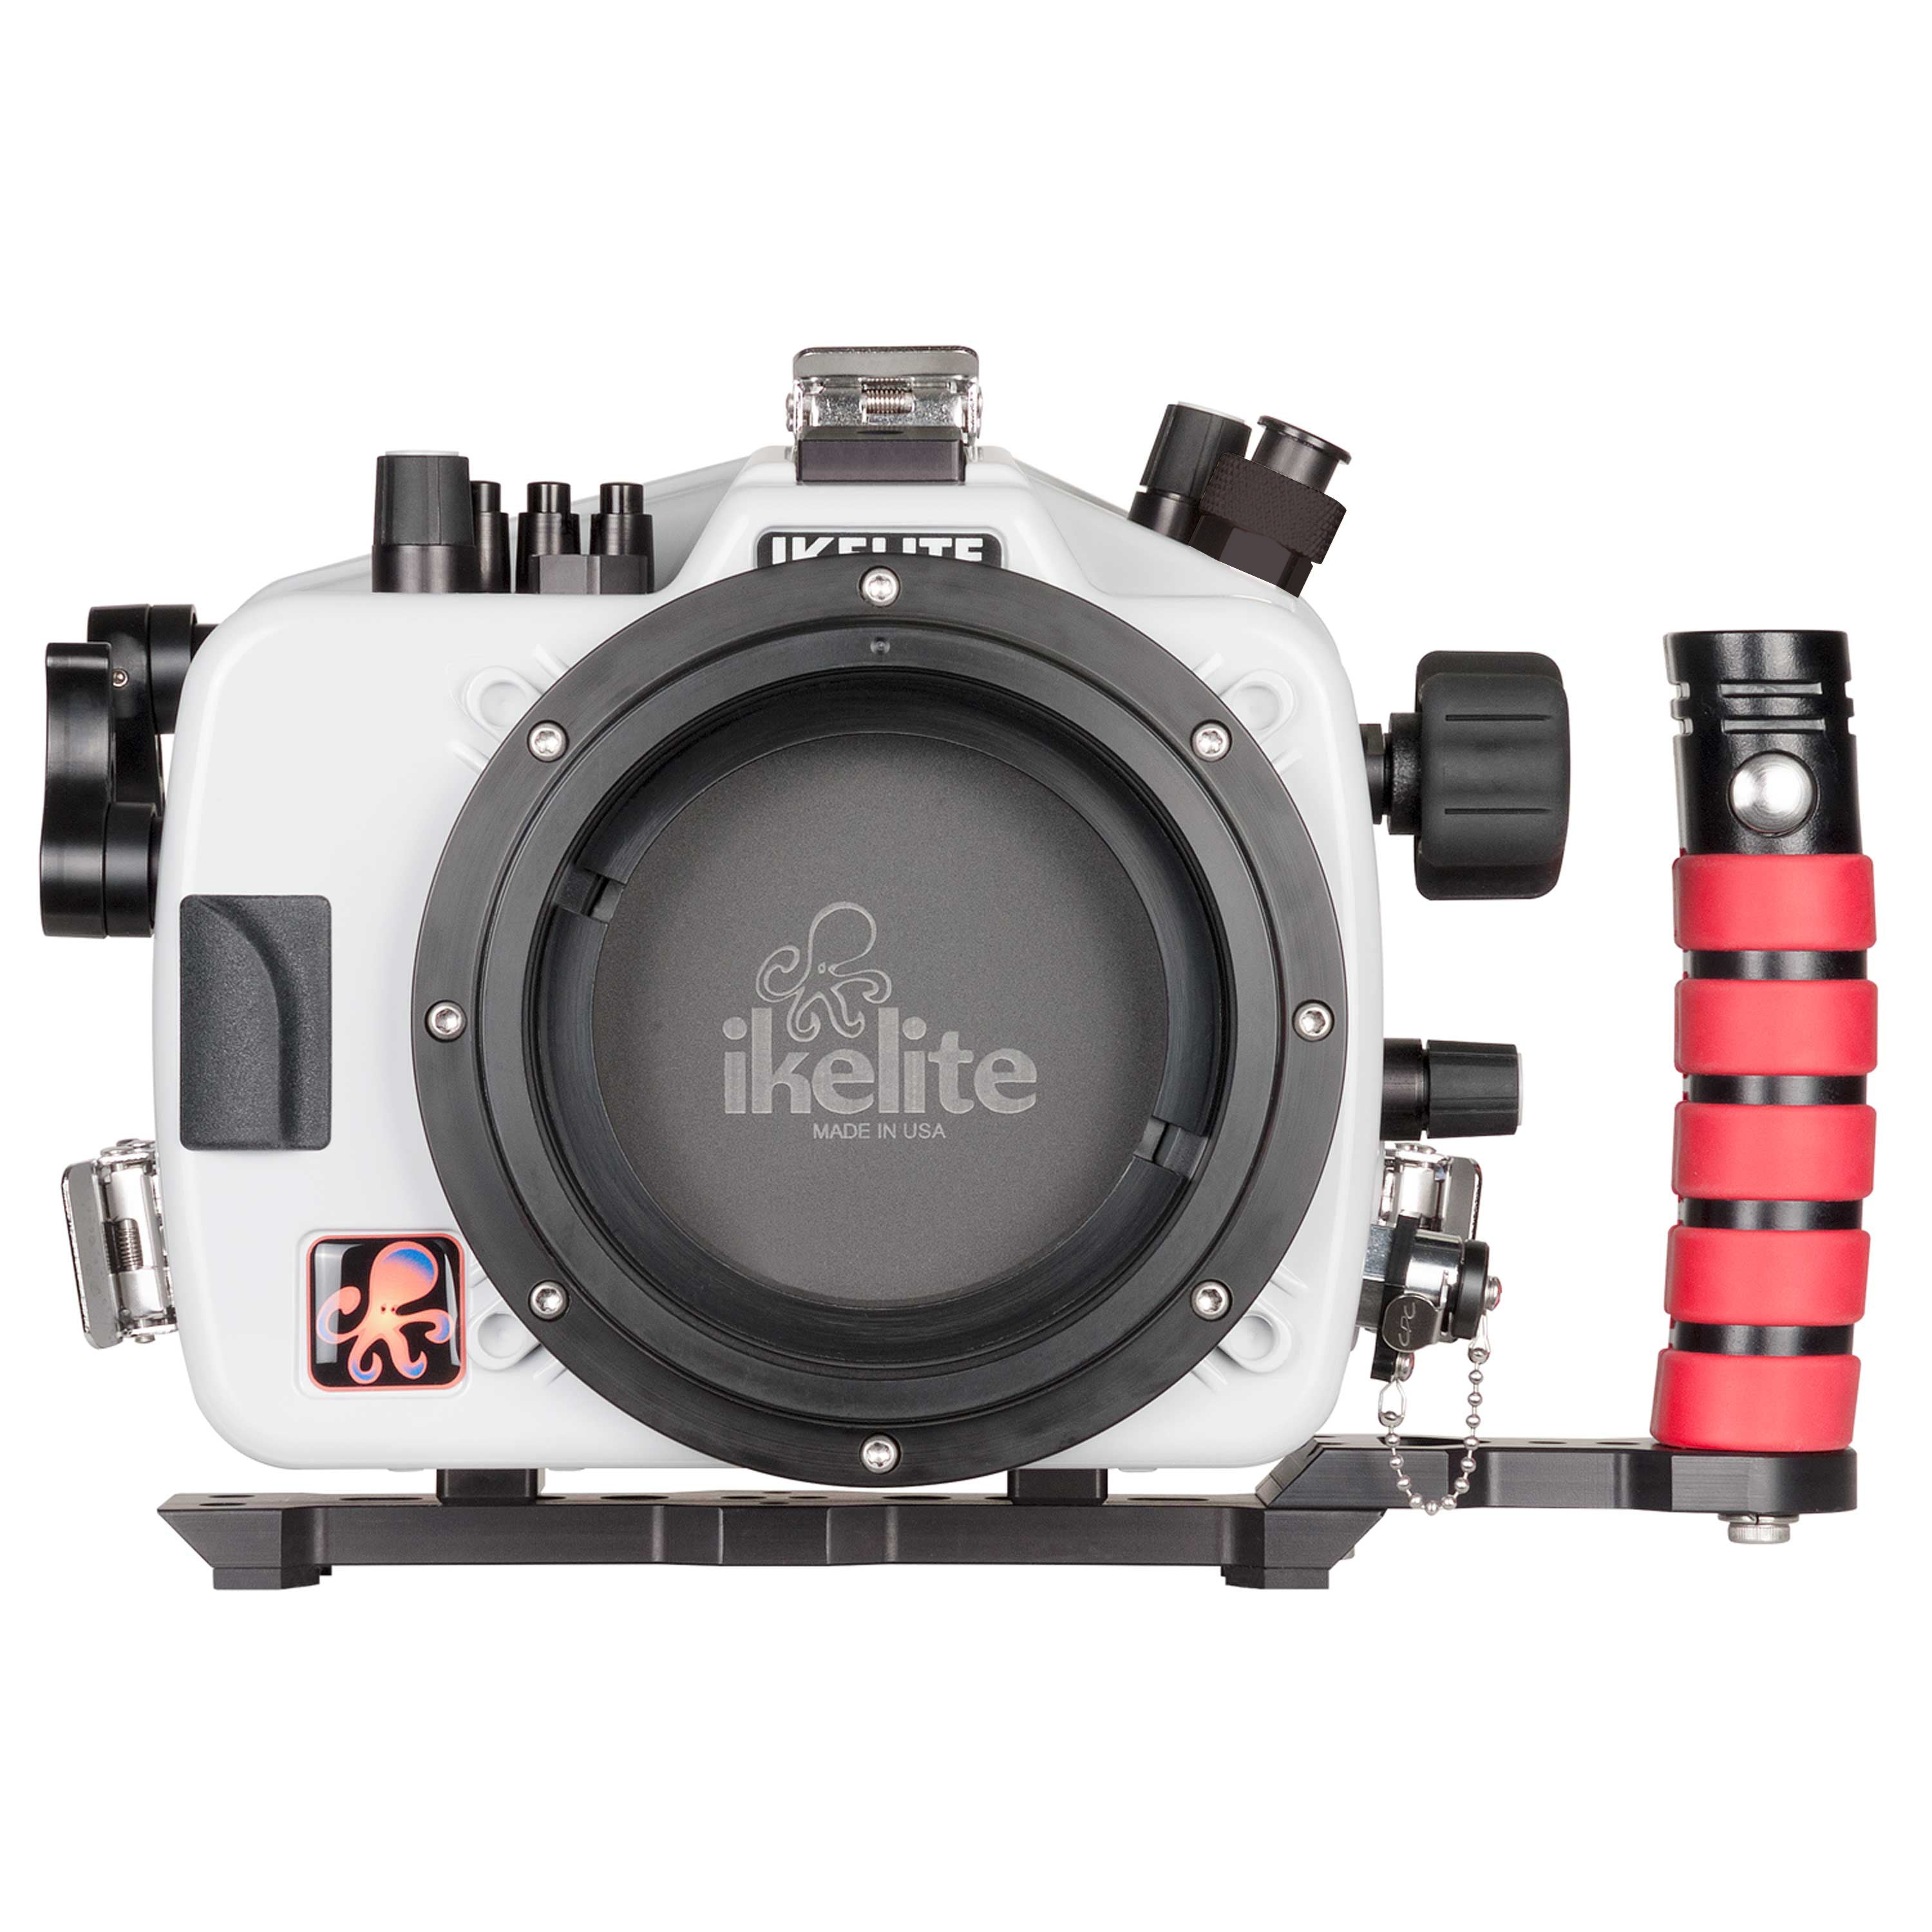 200DL Underwater Housing for Canon EOS 5D Mark III, 5D Mark IV, 5DS, 5DS R  DSLR Cameras